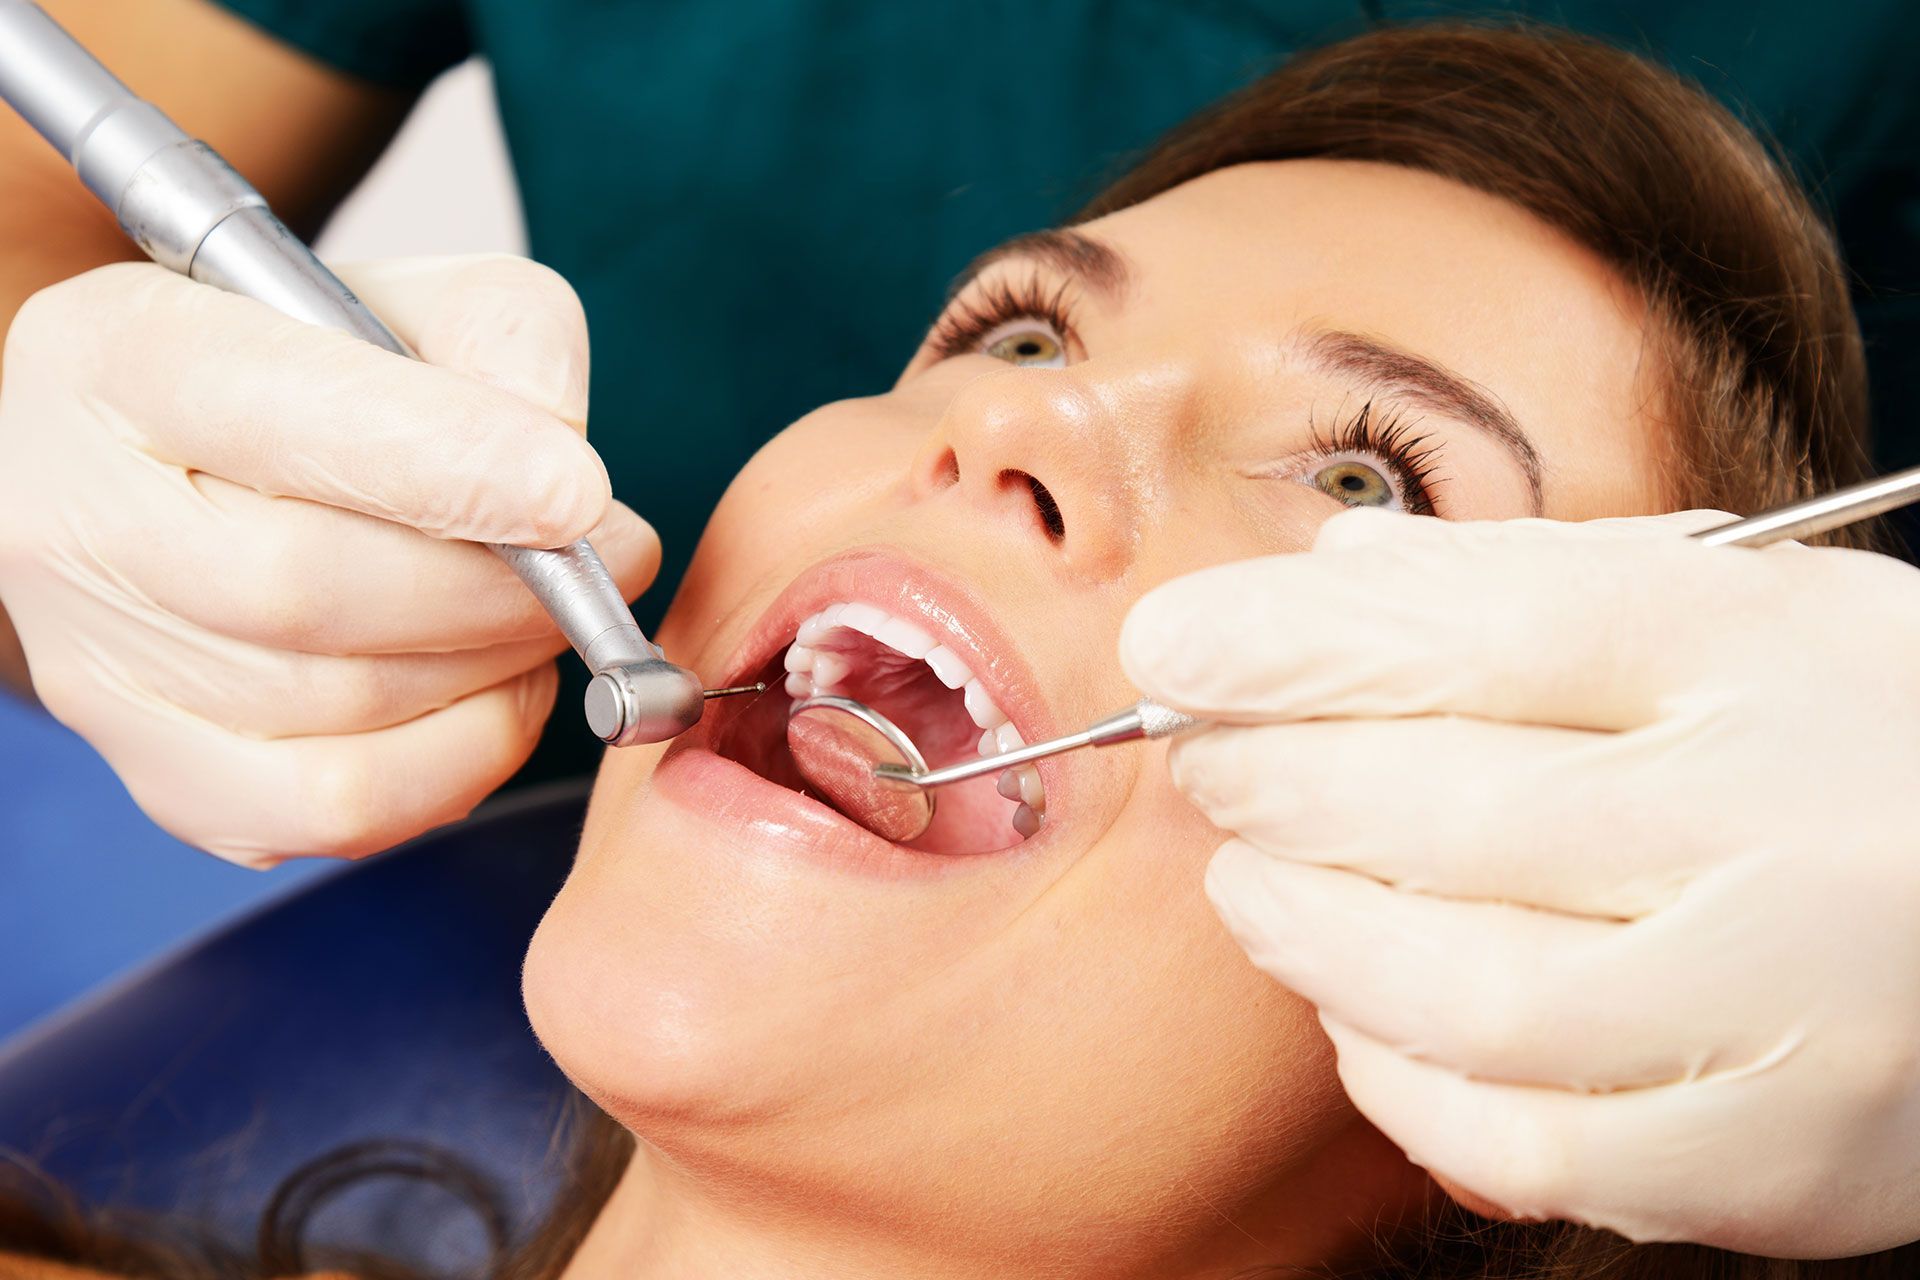 What is the Lifespan of a Root Canal?